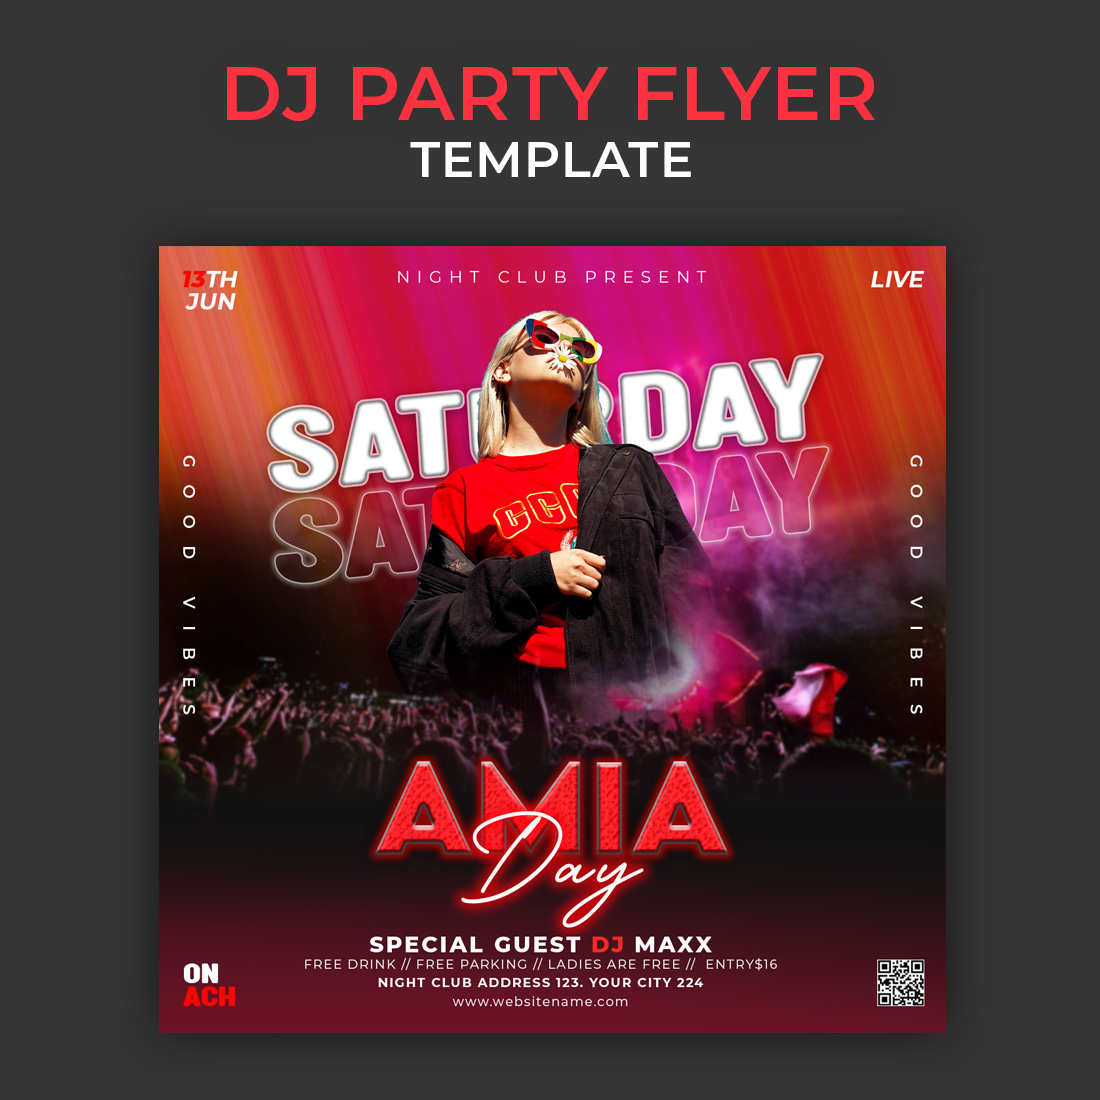 DJ Party Flyer Photoshop Template psd preview image.